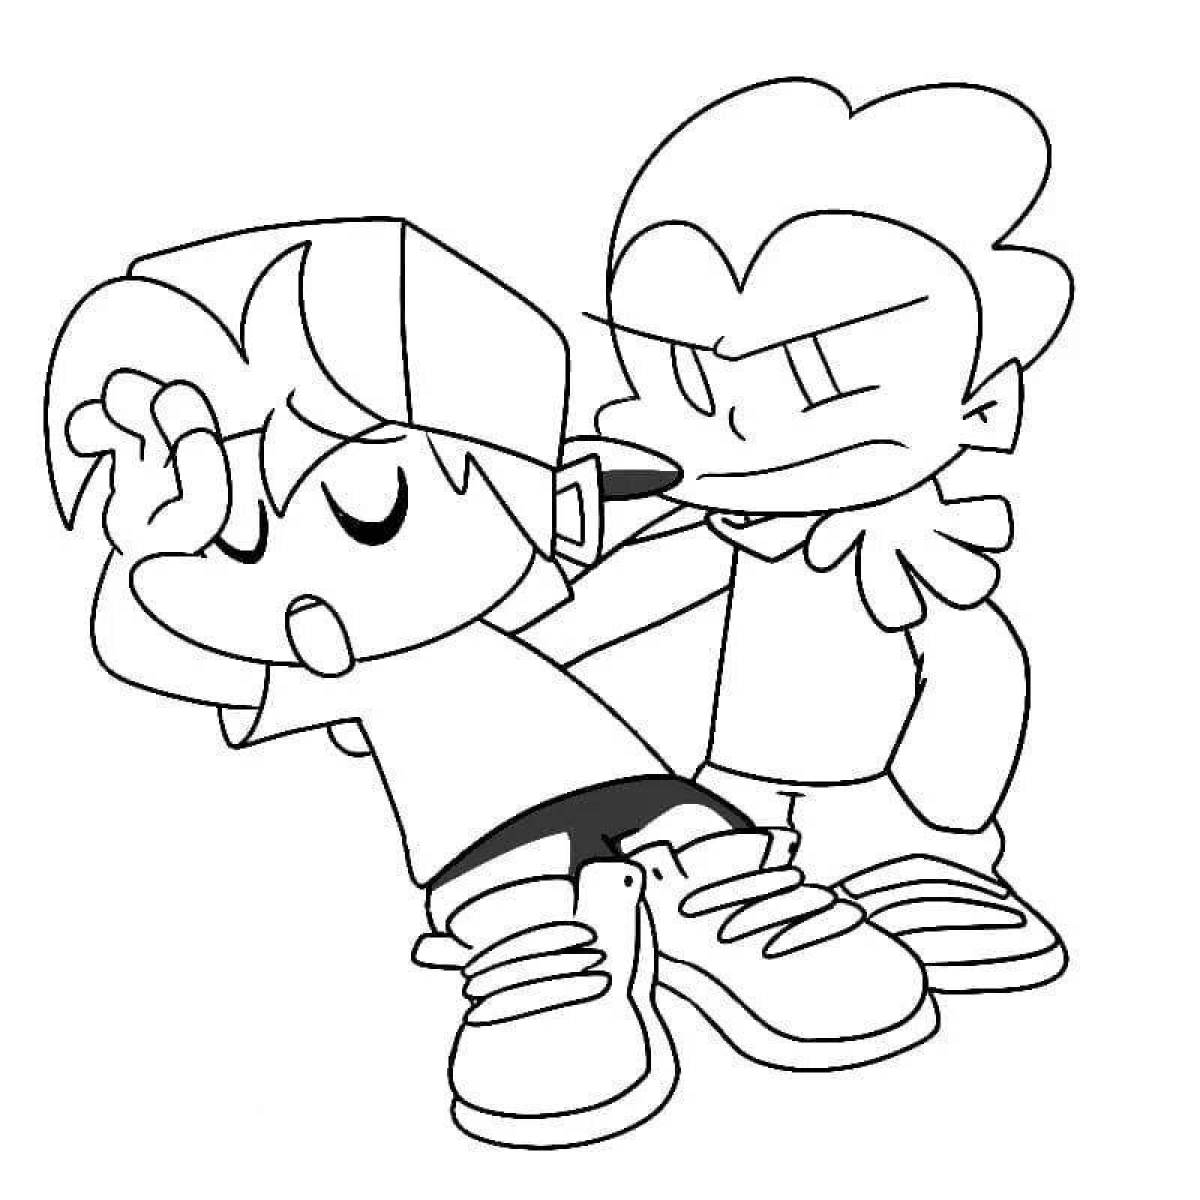 Playful fnf boyfriend coloring page